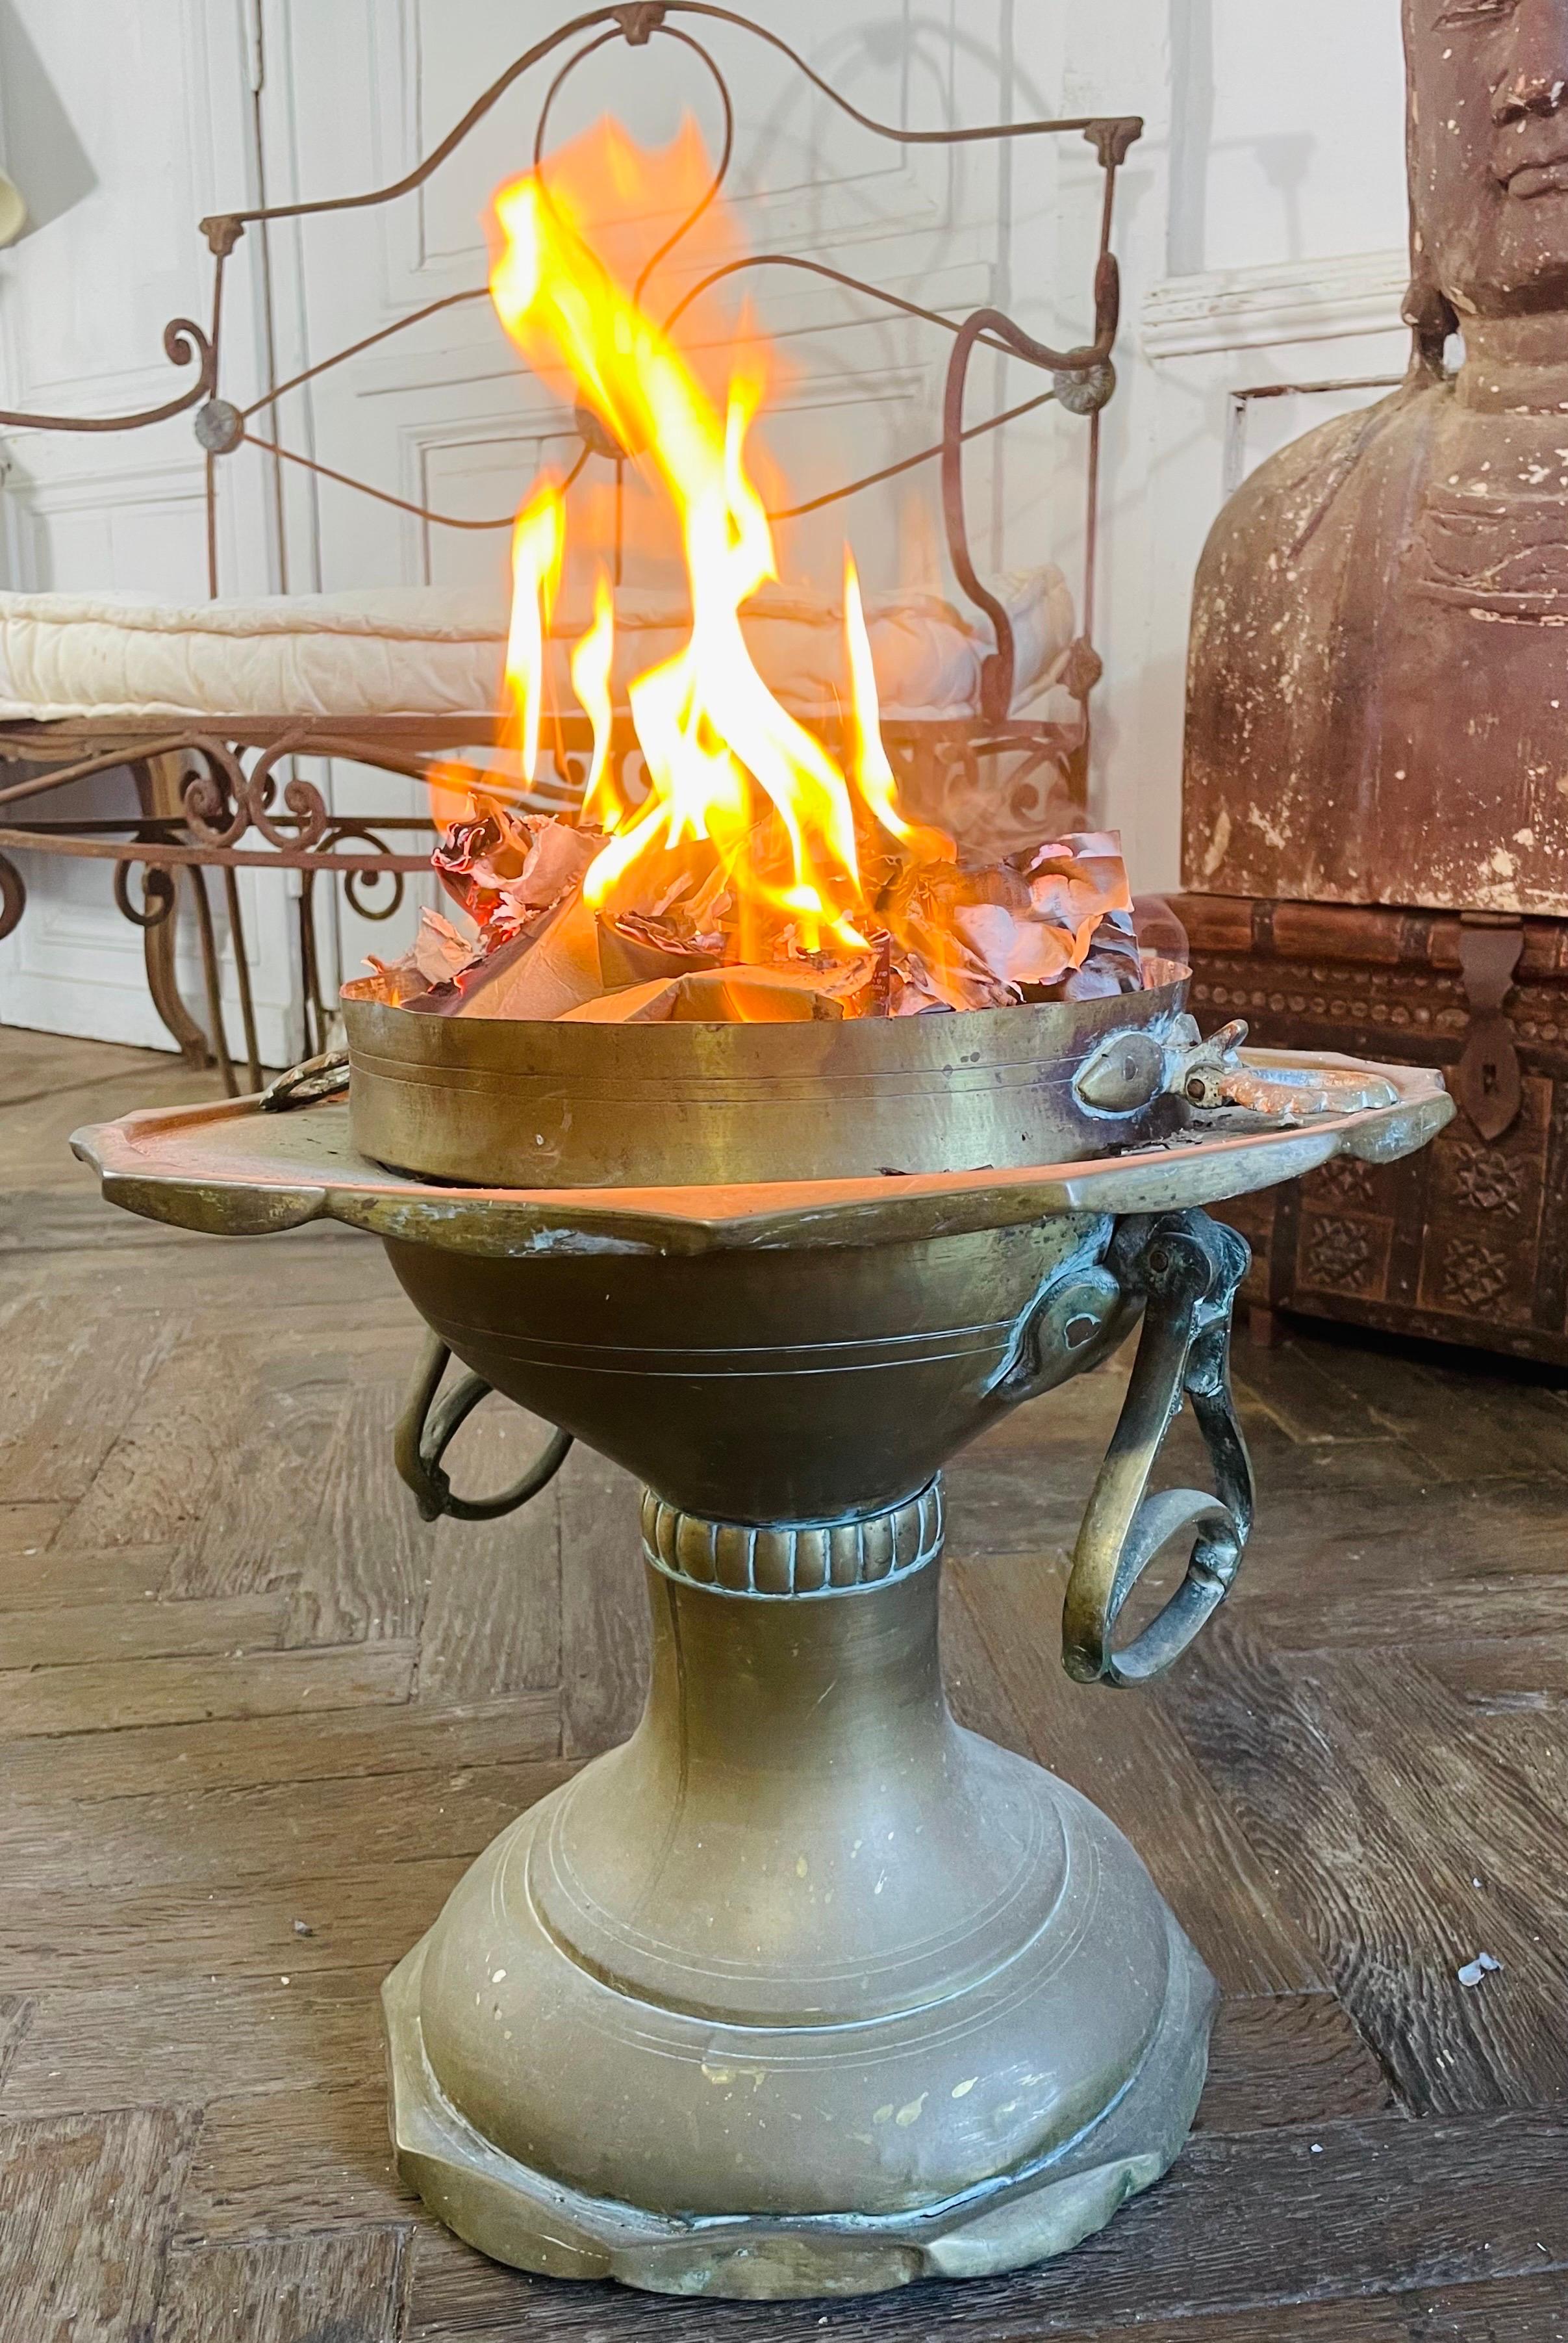 Copper brazier, fire dish, brazier
nineteenth century
Very Nice and decorative. 
Removable inner tank for easy maintenance. 

The hearth is made to contain burning embers, but can also accommodate plants or water.
The copper bowl is removable